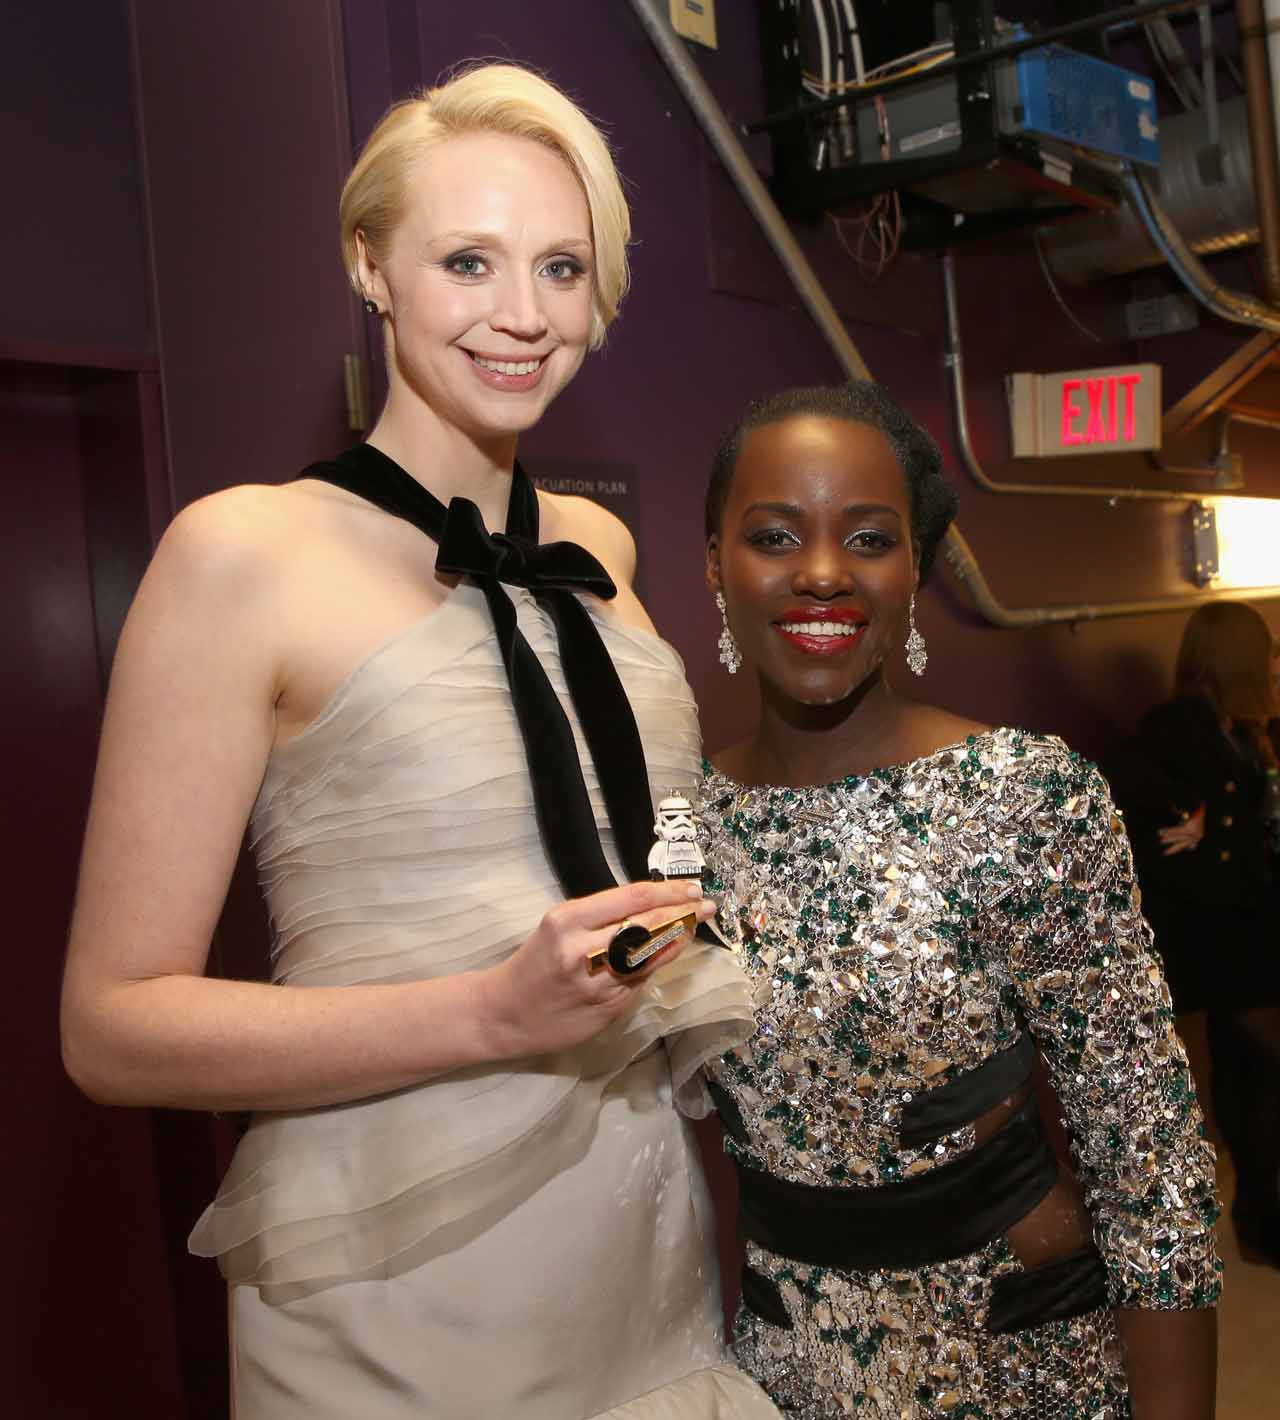 HOLLYWOOD, CA - DECEMBER 14:  Actresses Gwendoline Christie (L) and Lupita Nyong'o attend the World Premiere of ?Star Wars: The Force Awakens? at the Dolby, El Capitan, and TCL Theatres on December 14, 2015 in Hollywood, California.  (Photo by Jesse Grant/Getty Images for Disney) *** Local Caption *** Gwendoline Christie;Lupita Nyong'o